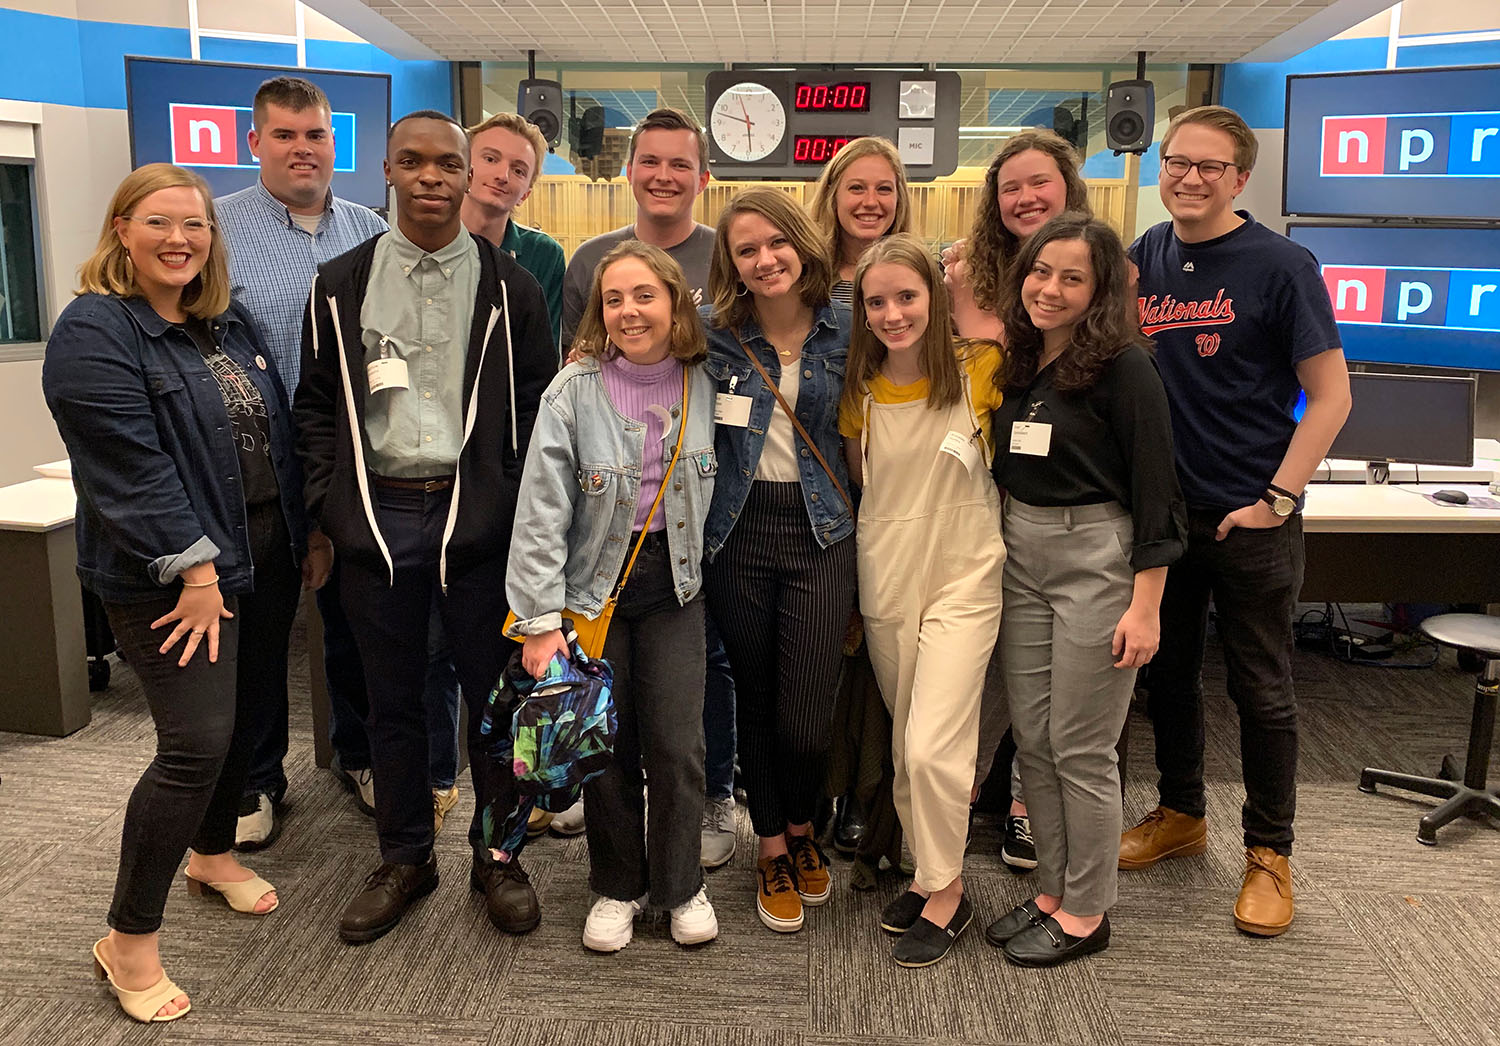 When I took a group of students to Washington D.C., I arranged with several alumni working at NPR to give our group a tour.